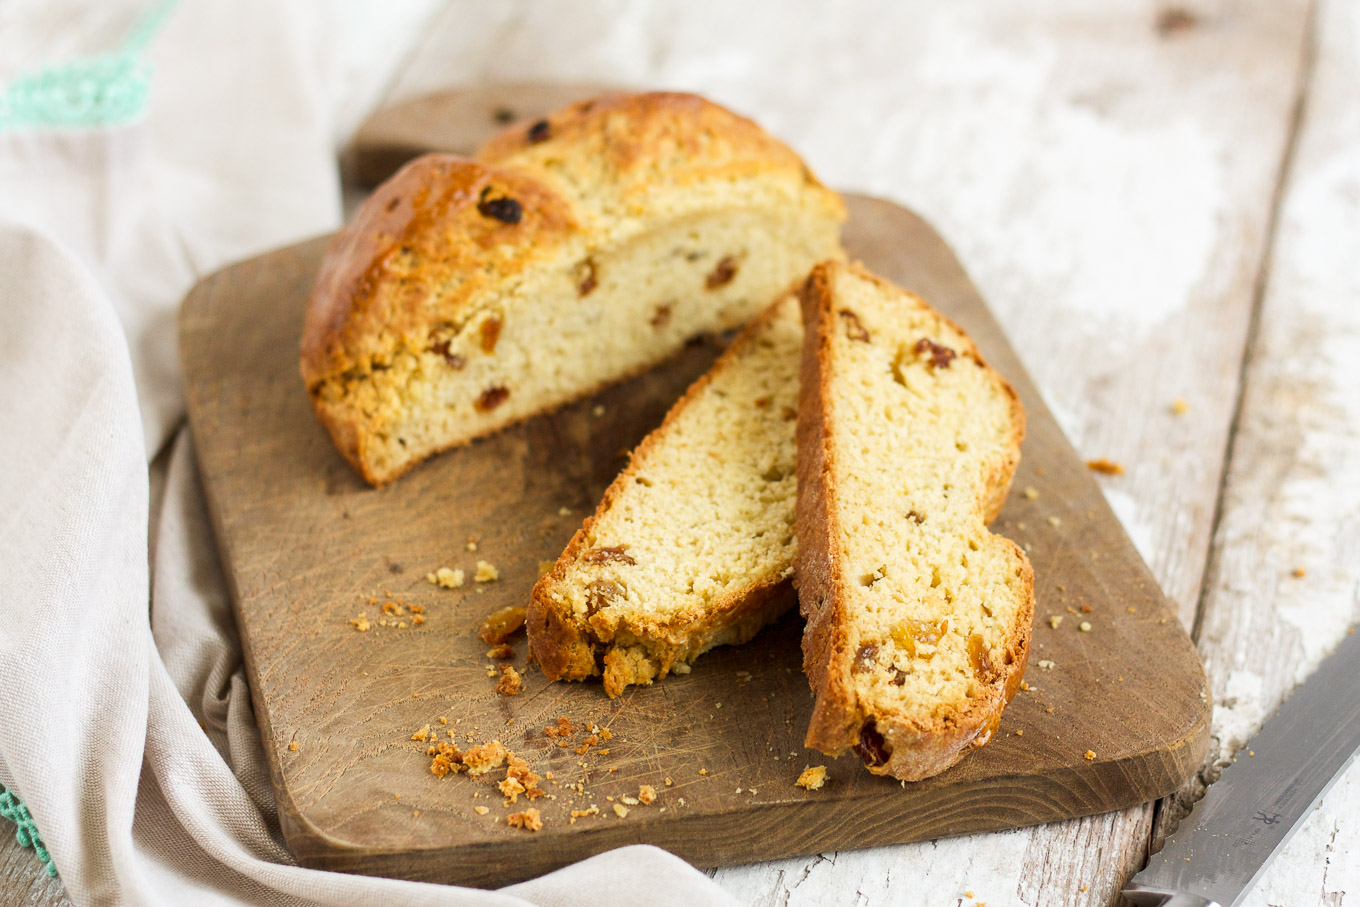 Homemade Irish Soda Bread is perfect for St. Patrick's Day dinner, but also tastes delicious for breakfast or tea time.